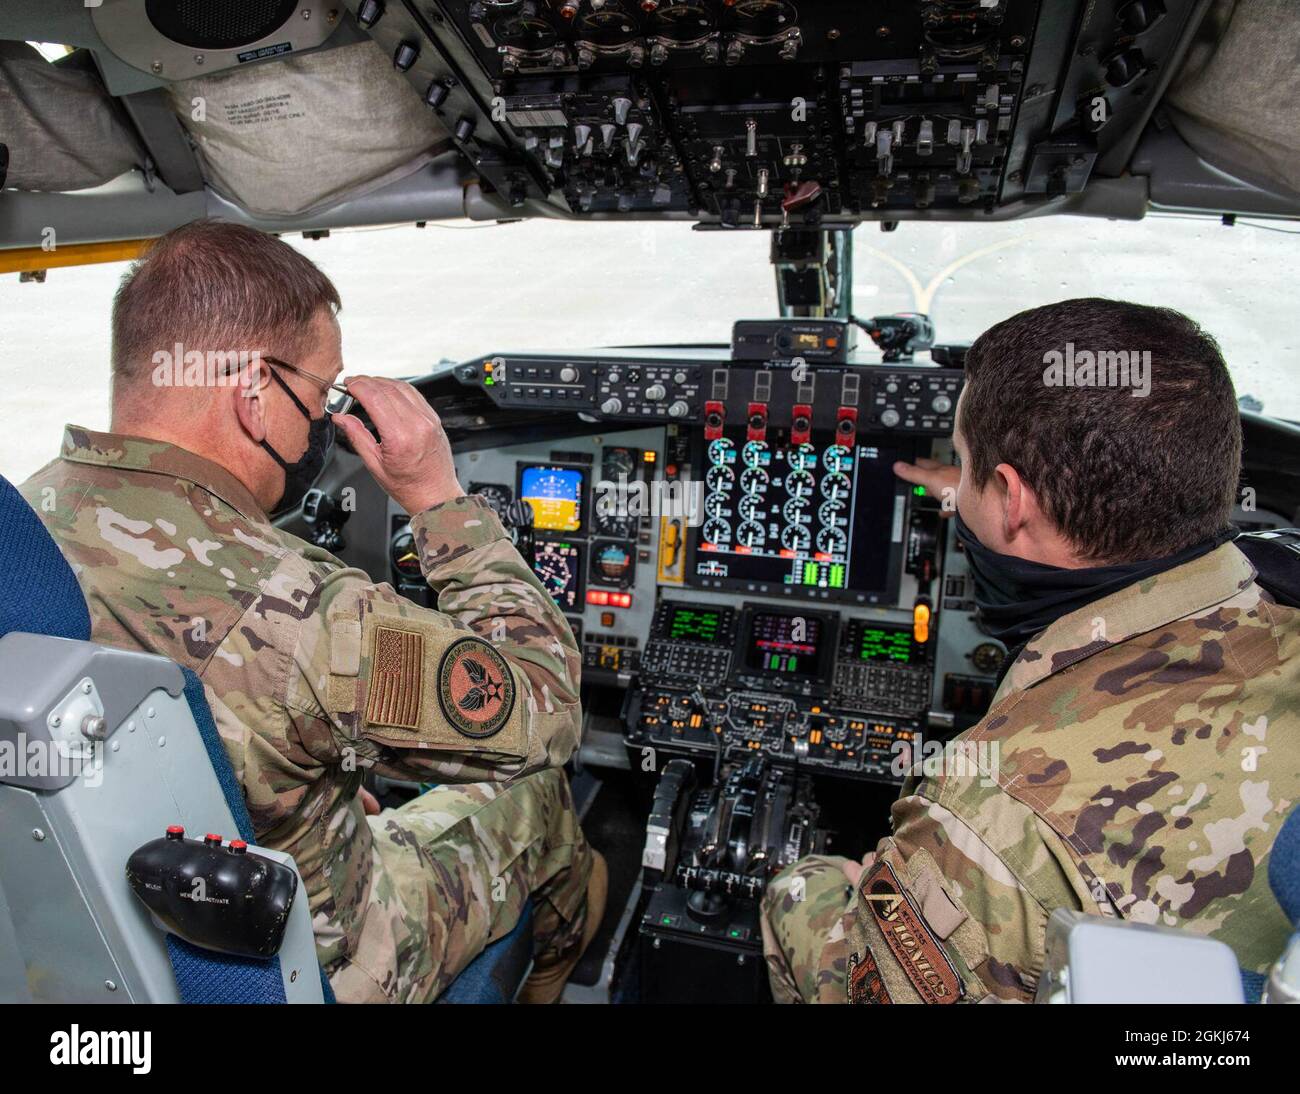 Gen. Max Stitzer, to the Chief of the Air Force Reserve and Military Deputy to the Directorate of Staff-Integration gets a briefing the avionics inside the flight-deck of